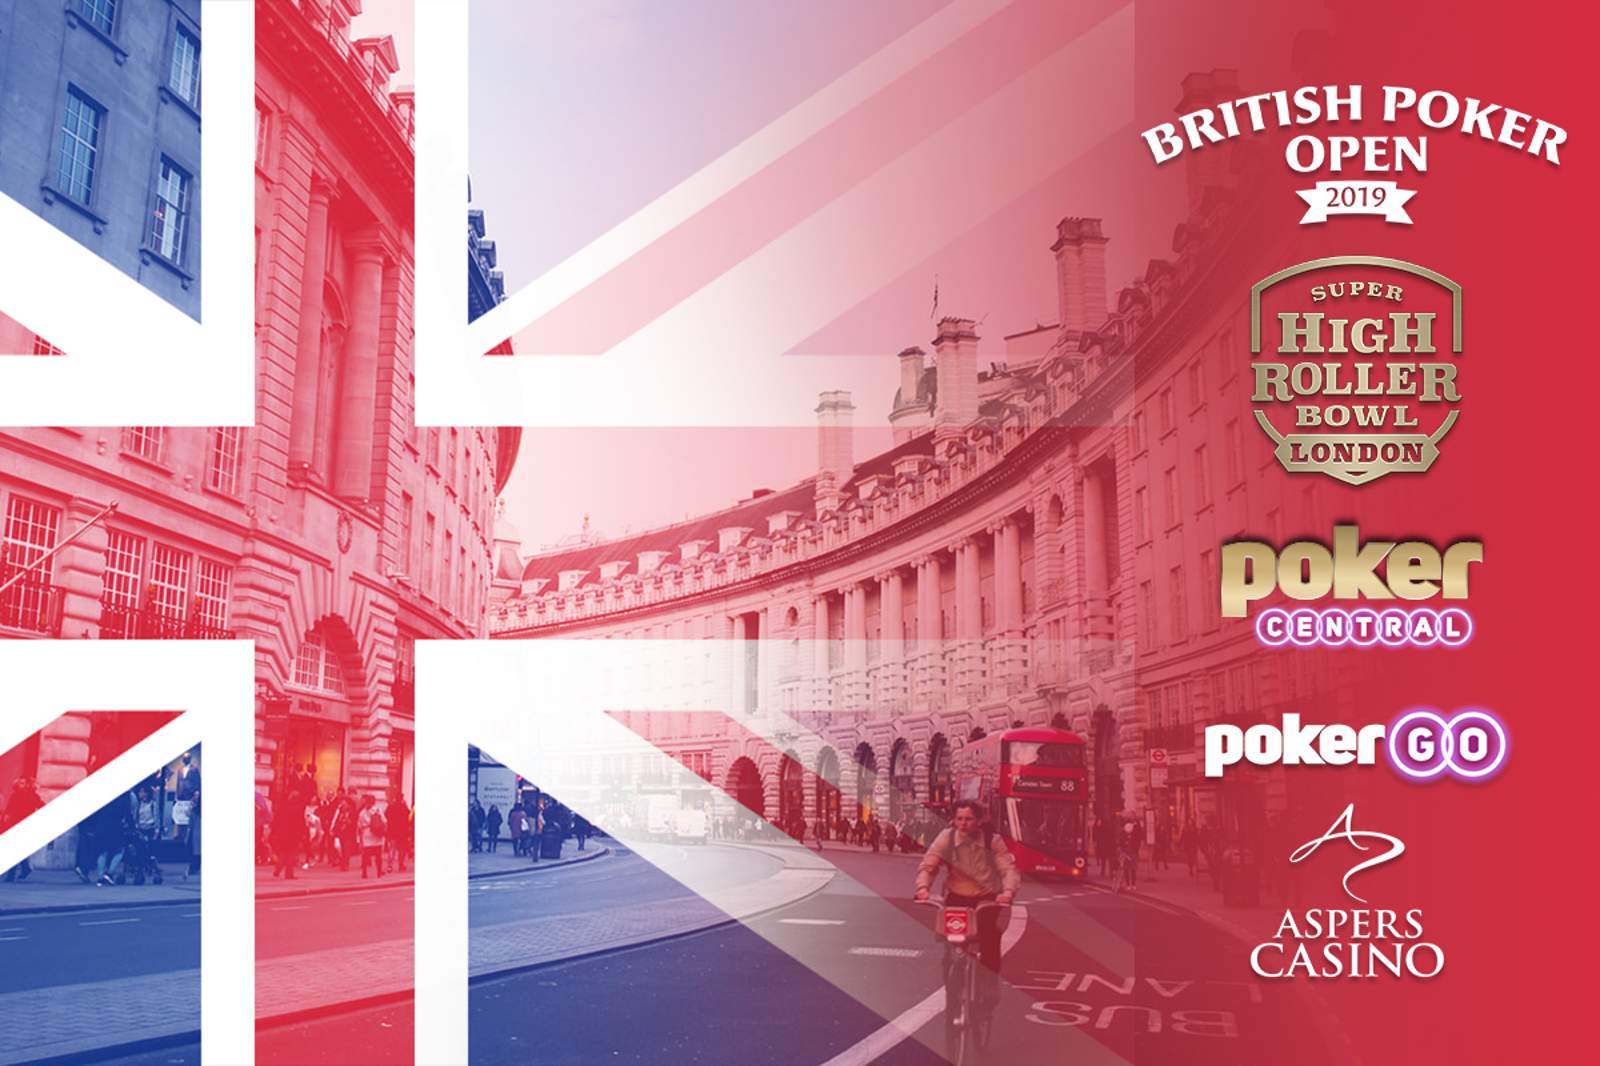 Everything You Need to Know About The British Poker Open and Super High Roller Bowl London